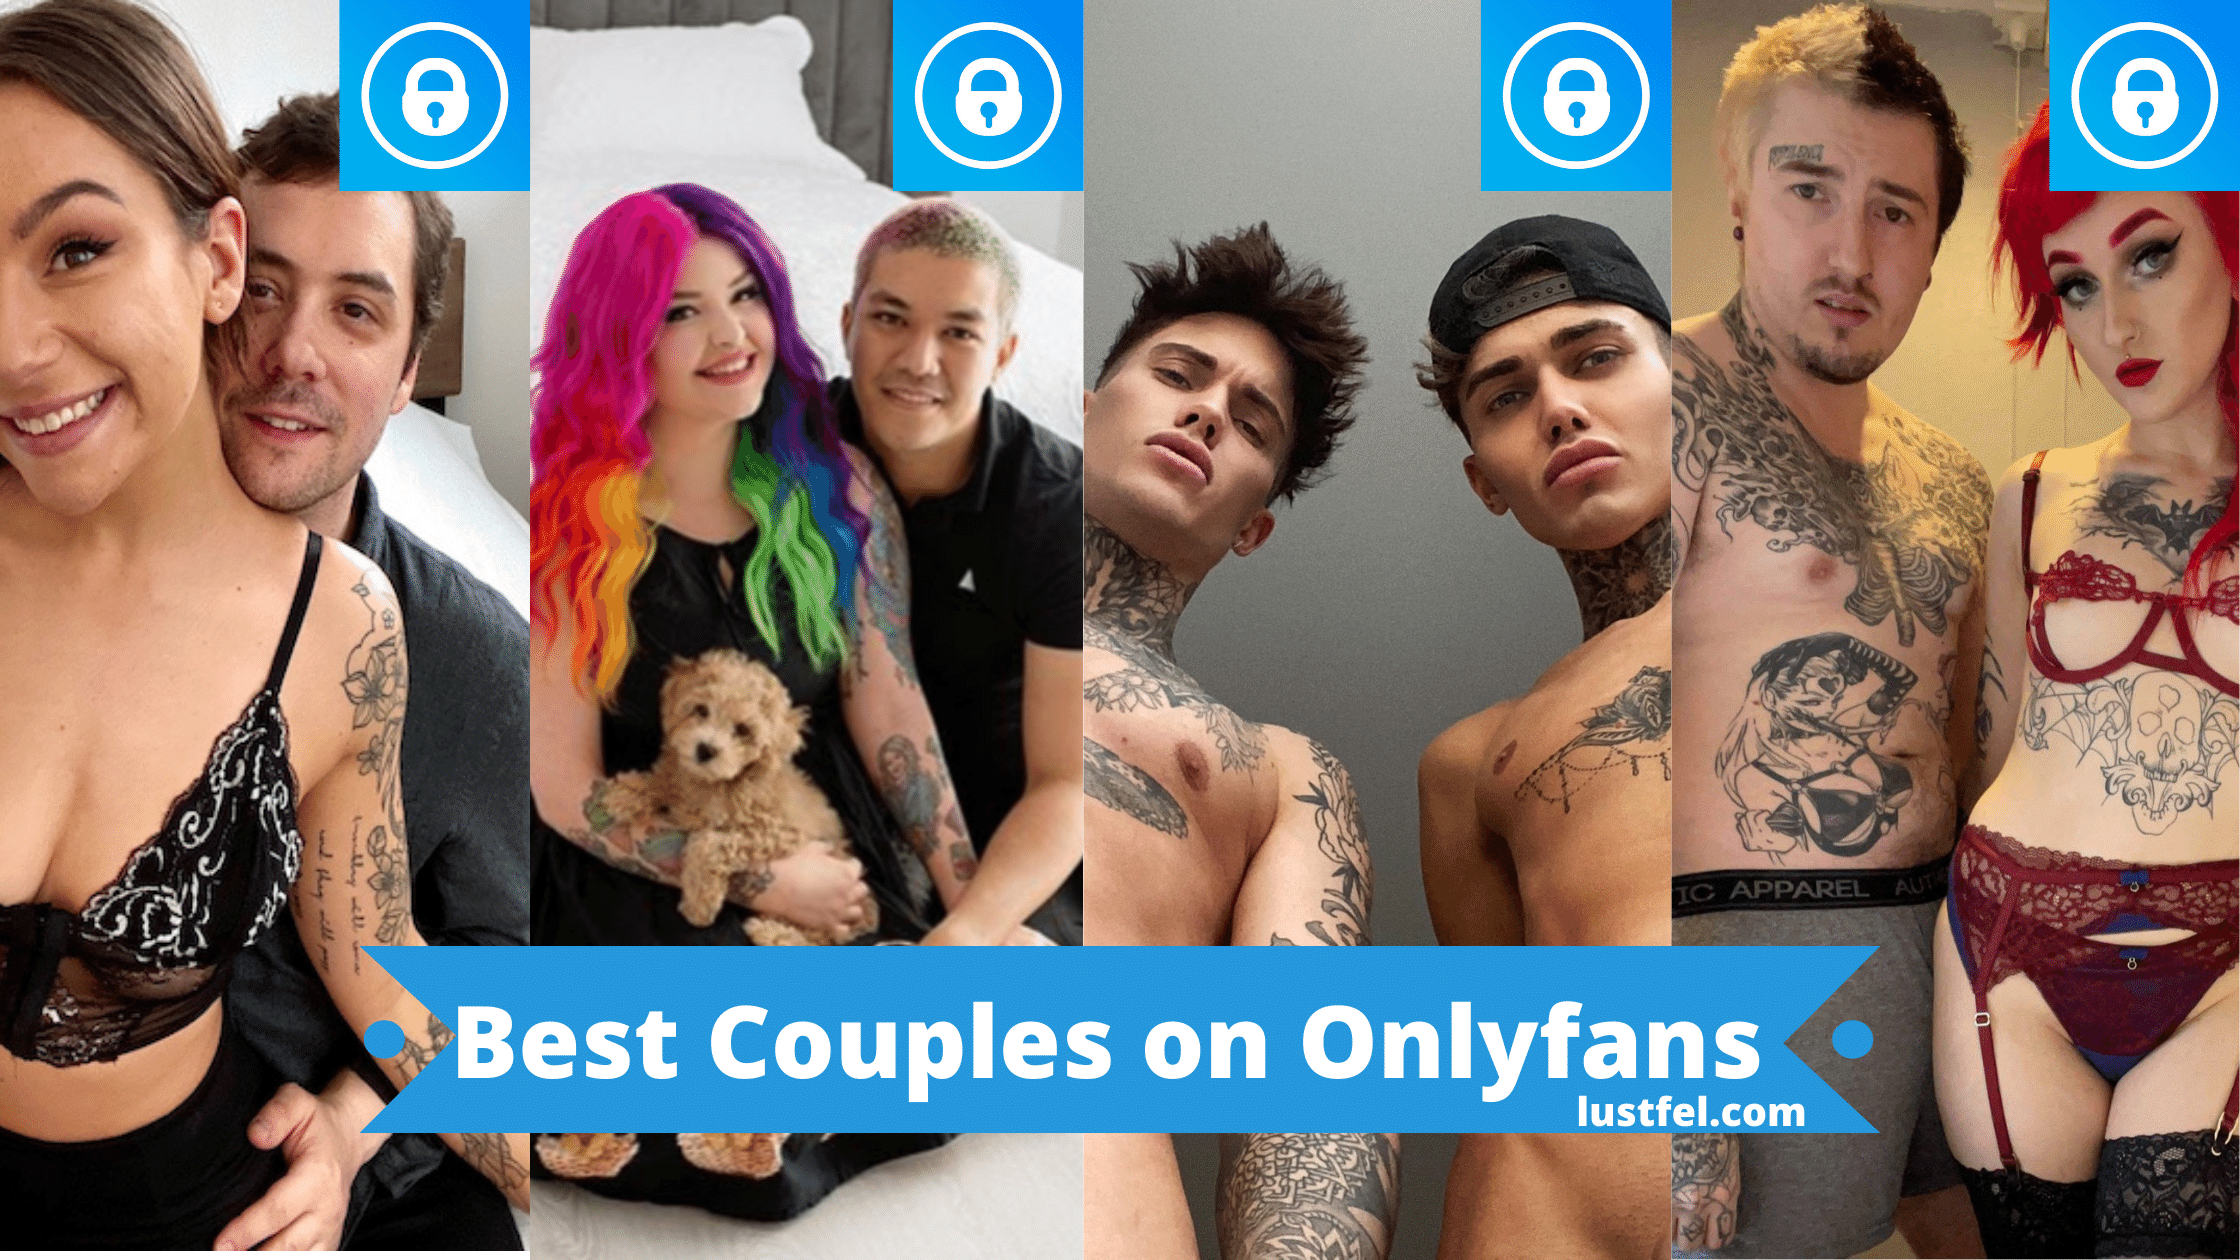 Couples on only fans